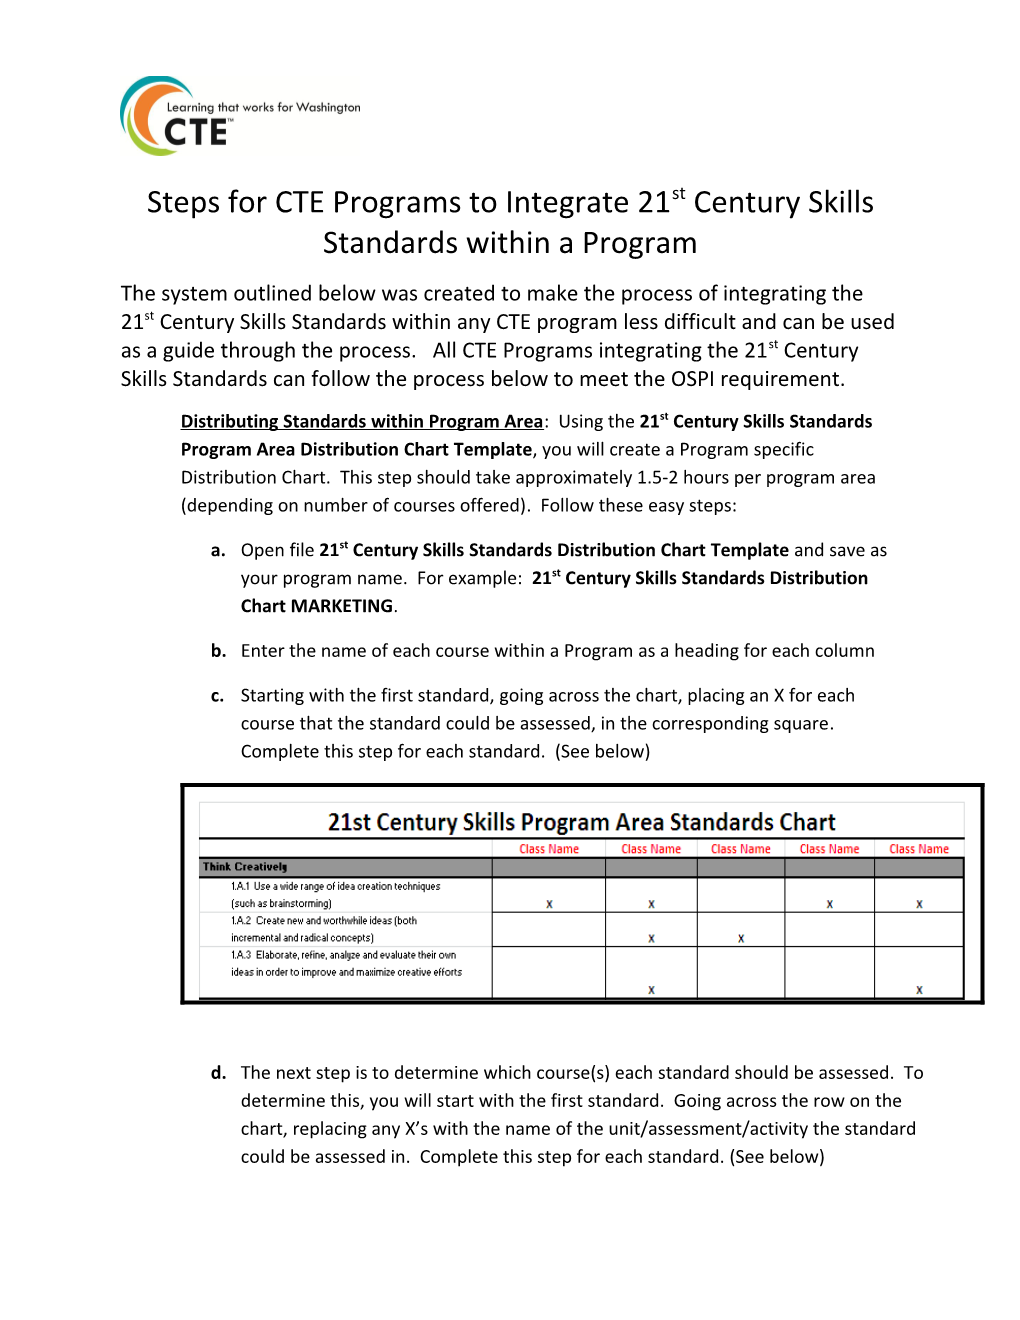 Steps for CTE Programs to Integrate 21St Century Skills Standards Within a Program